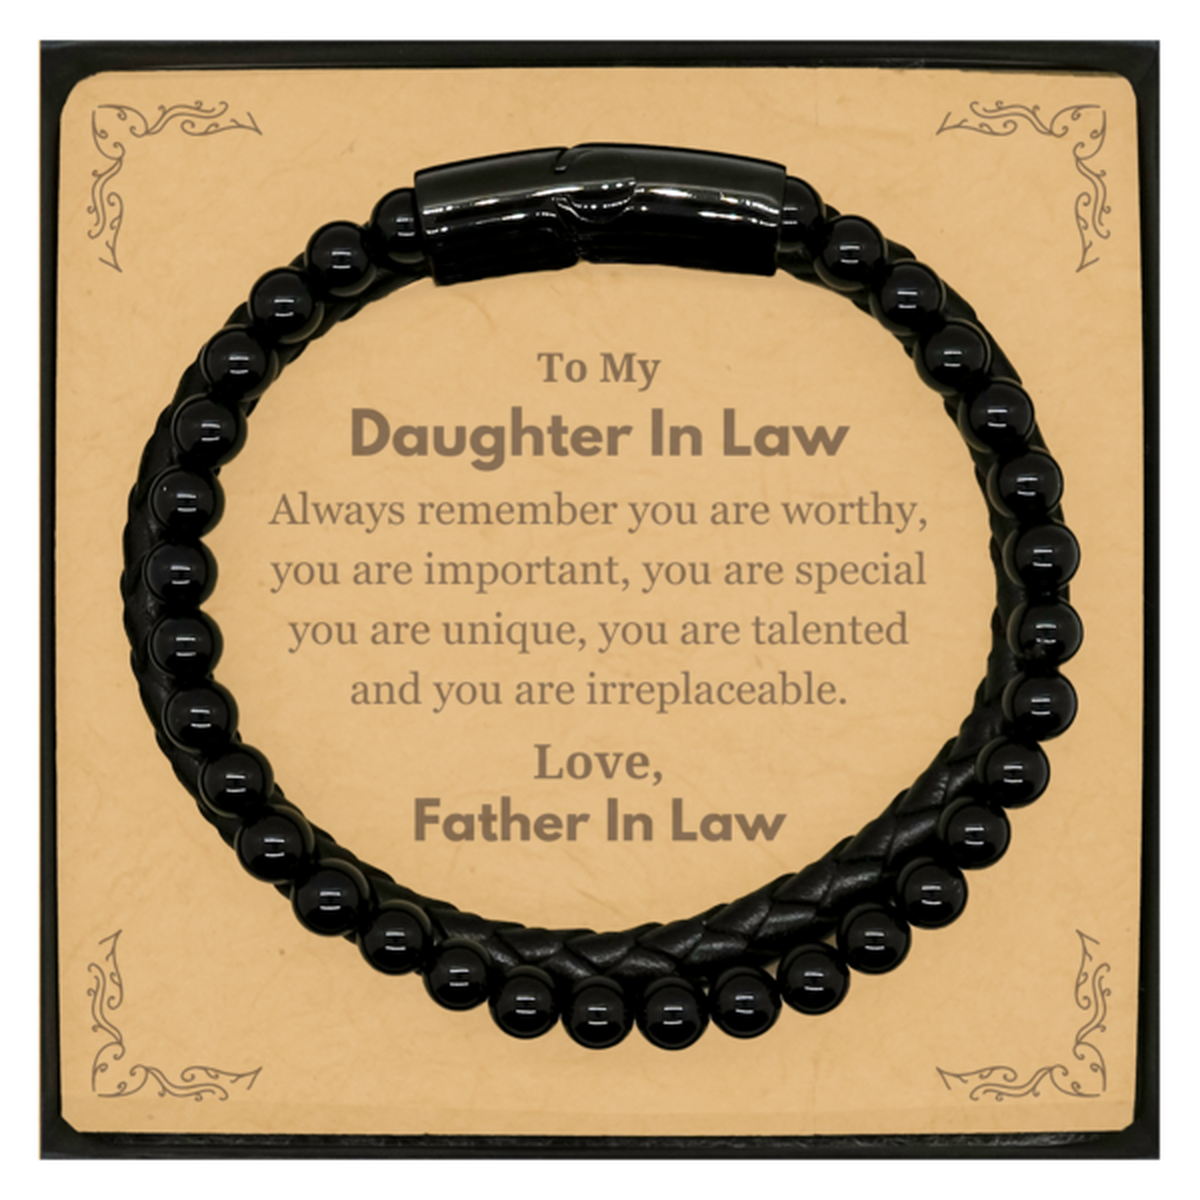 Daughter In Law Birthday Gifts from Father In Law, Inspirational Stone Leather Bracelets for Daughter In Law Christmas Graduation Gifts for Daughter In Law Always remember you are worthy, you are important. Love, Father In Law